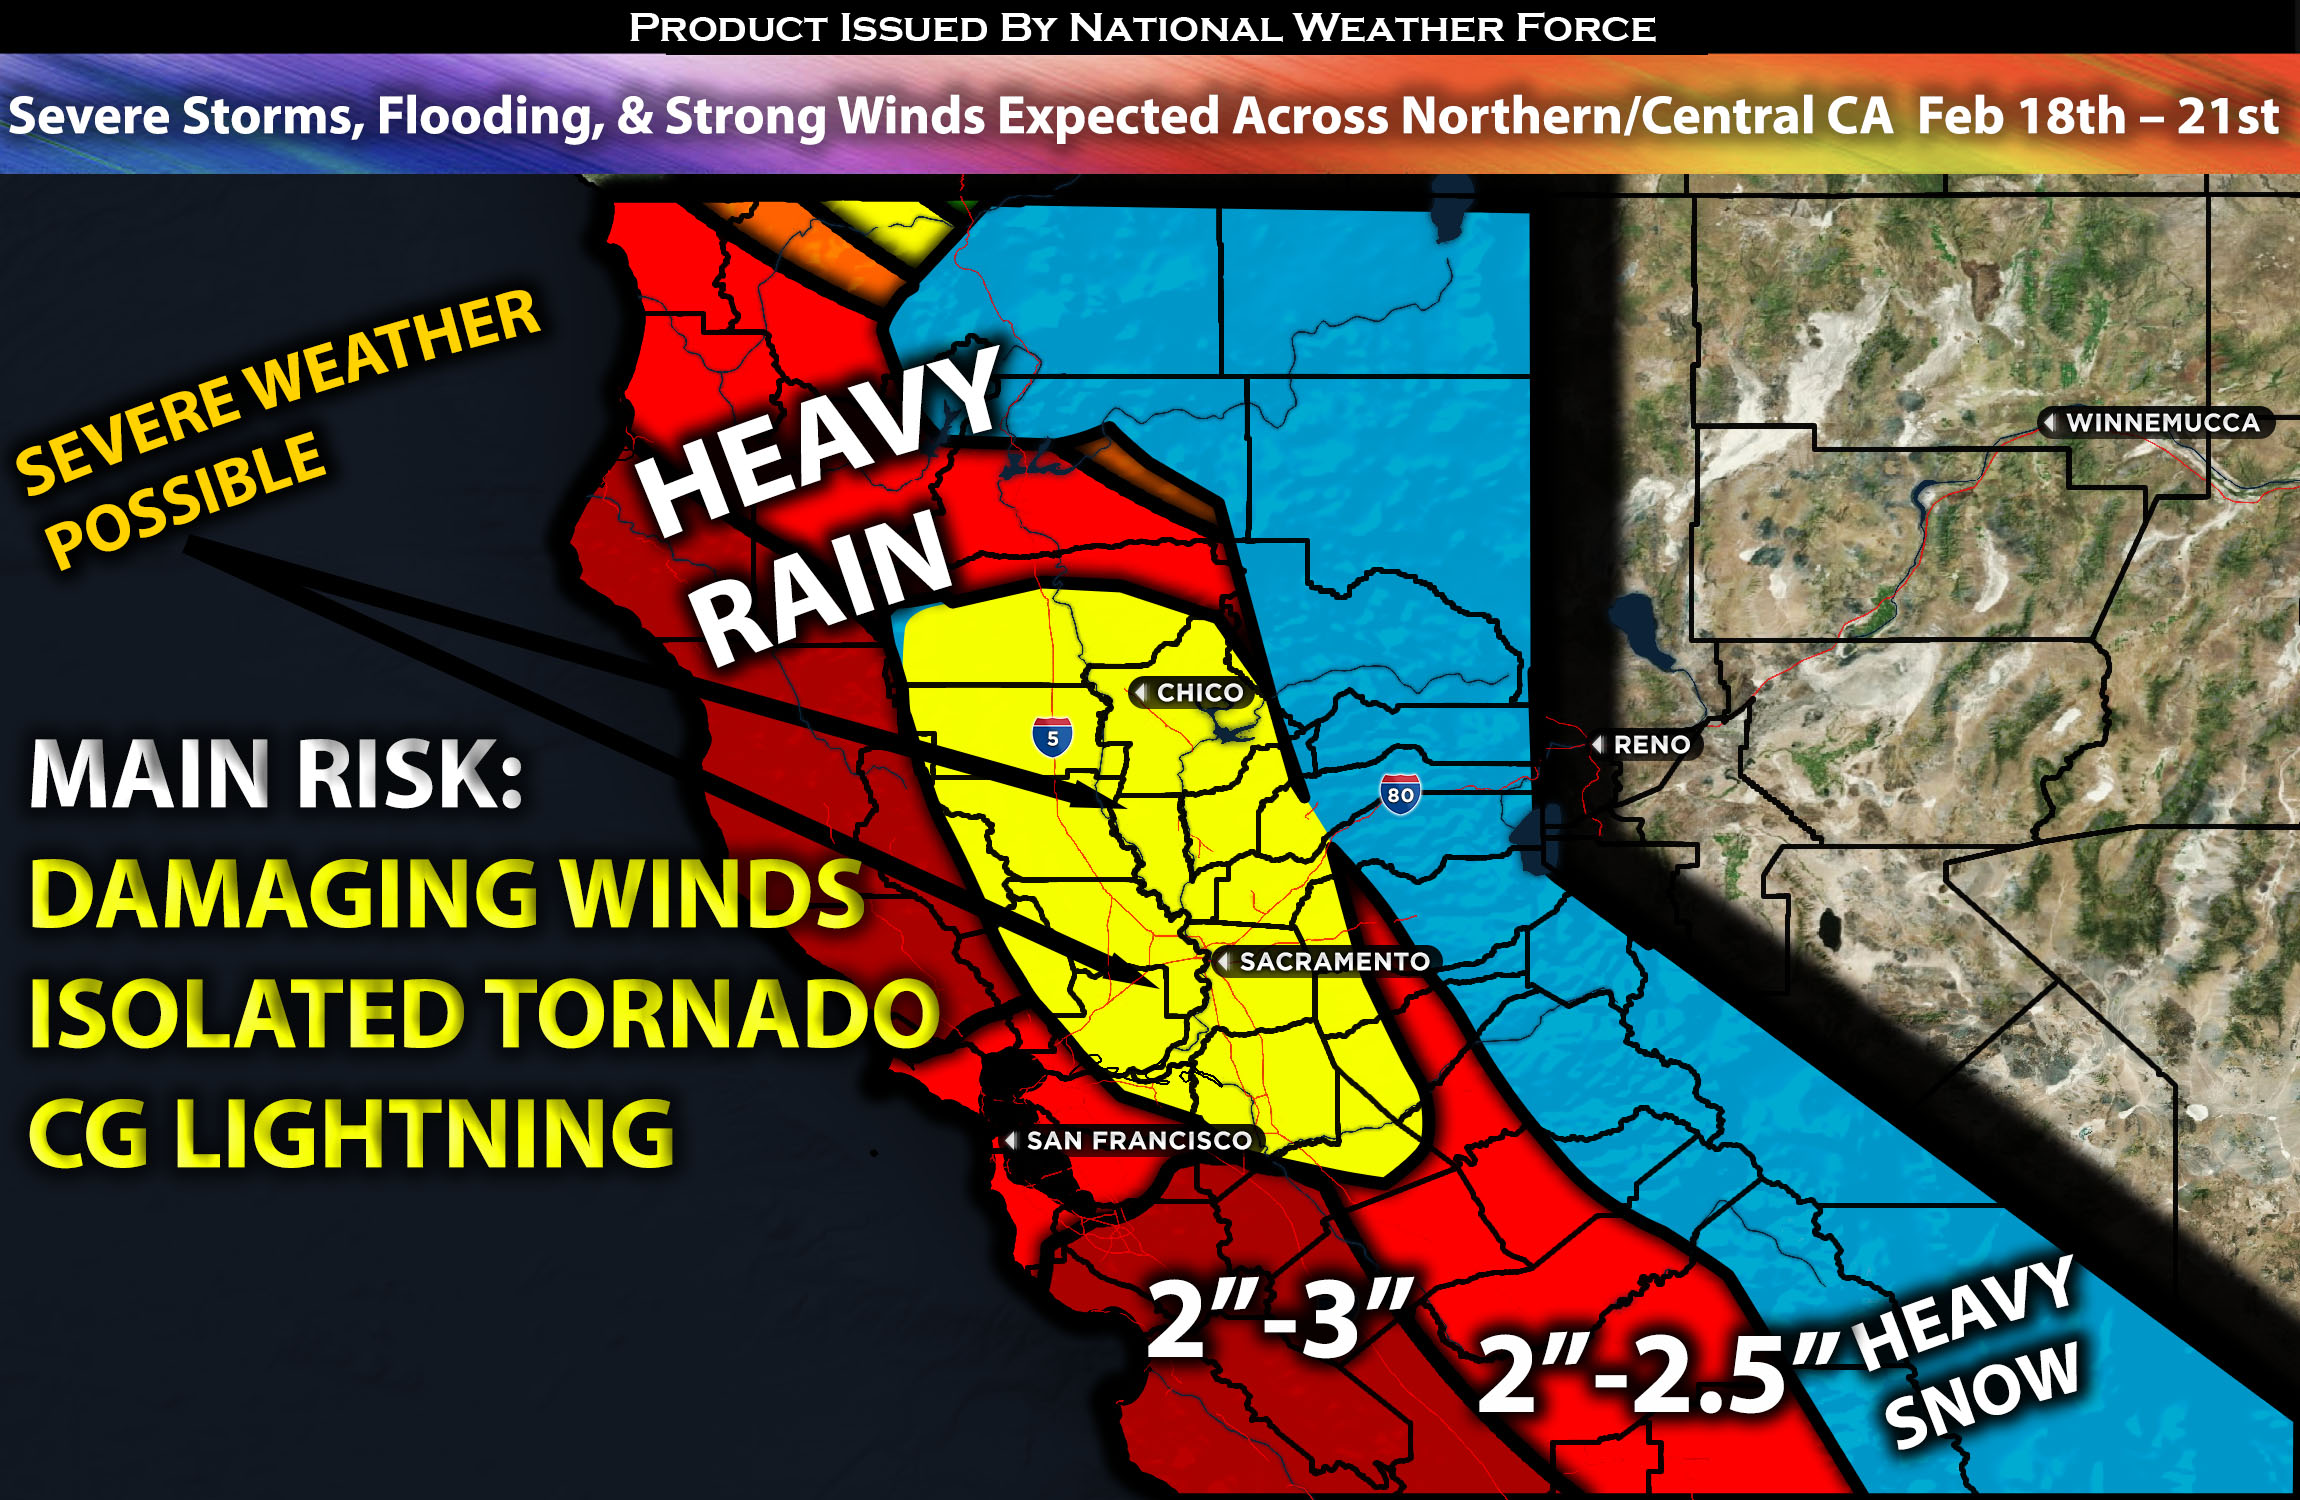 Severe Storms, Flooding, & Strong Winds Expected Across Northern/Central CA from Feb 18th – 21st